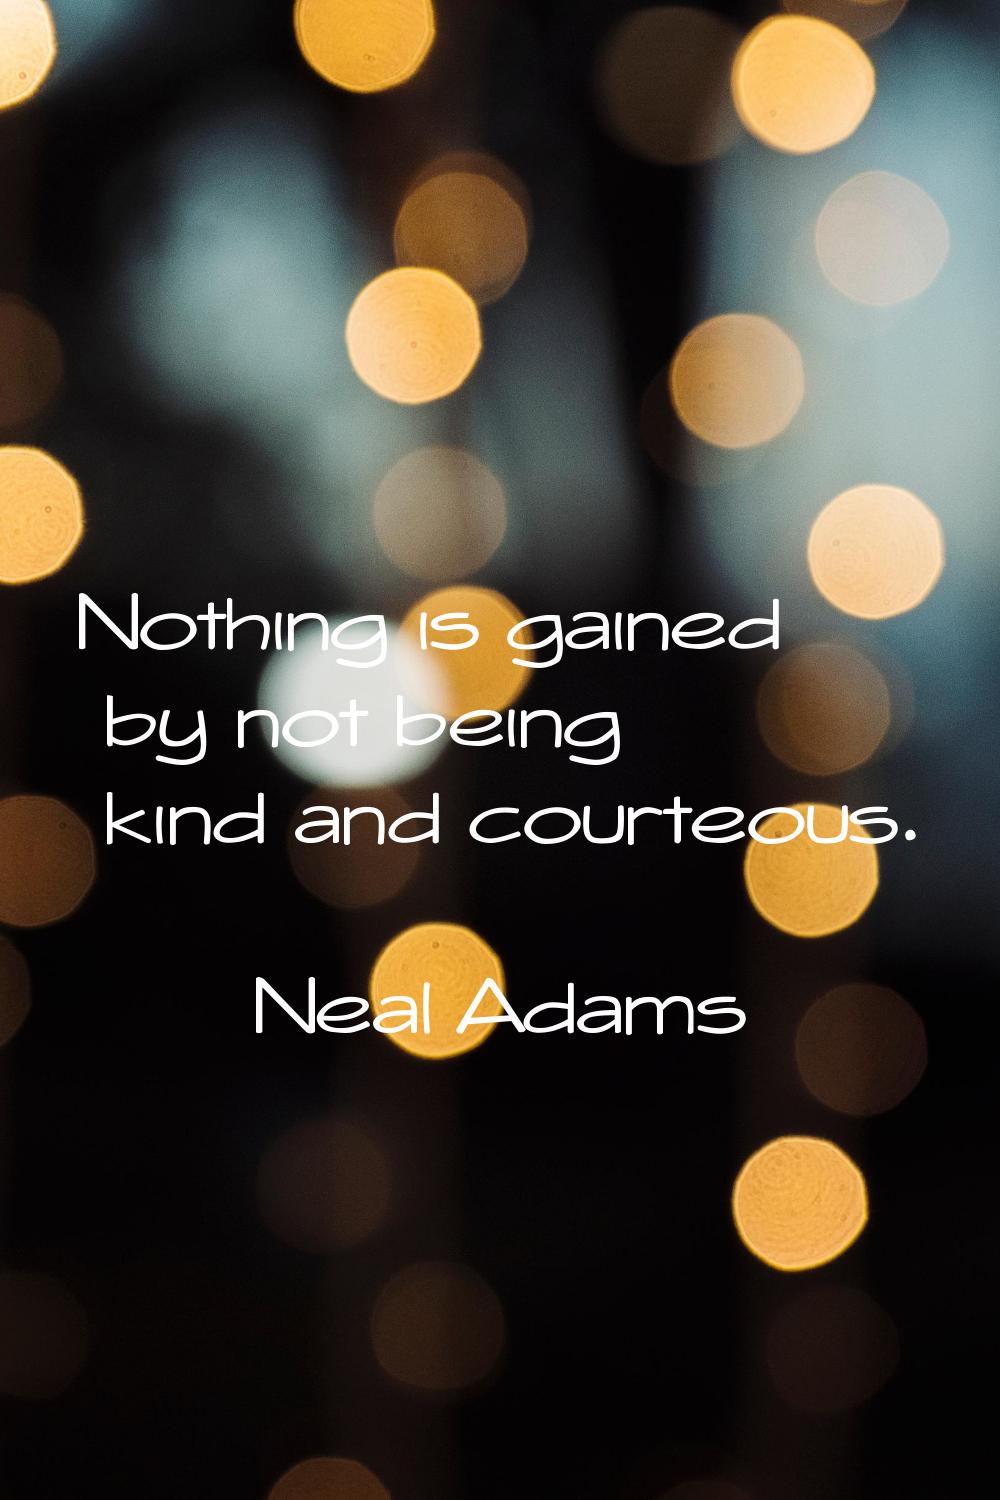 Nothing is gained by not being kind and courteous.